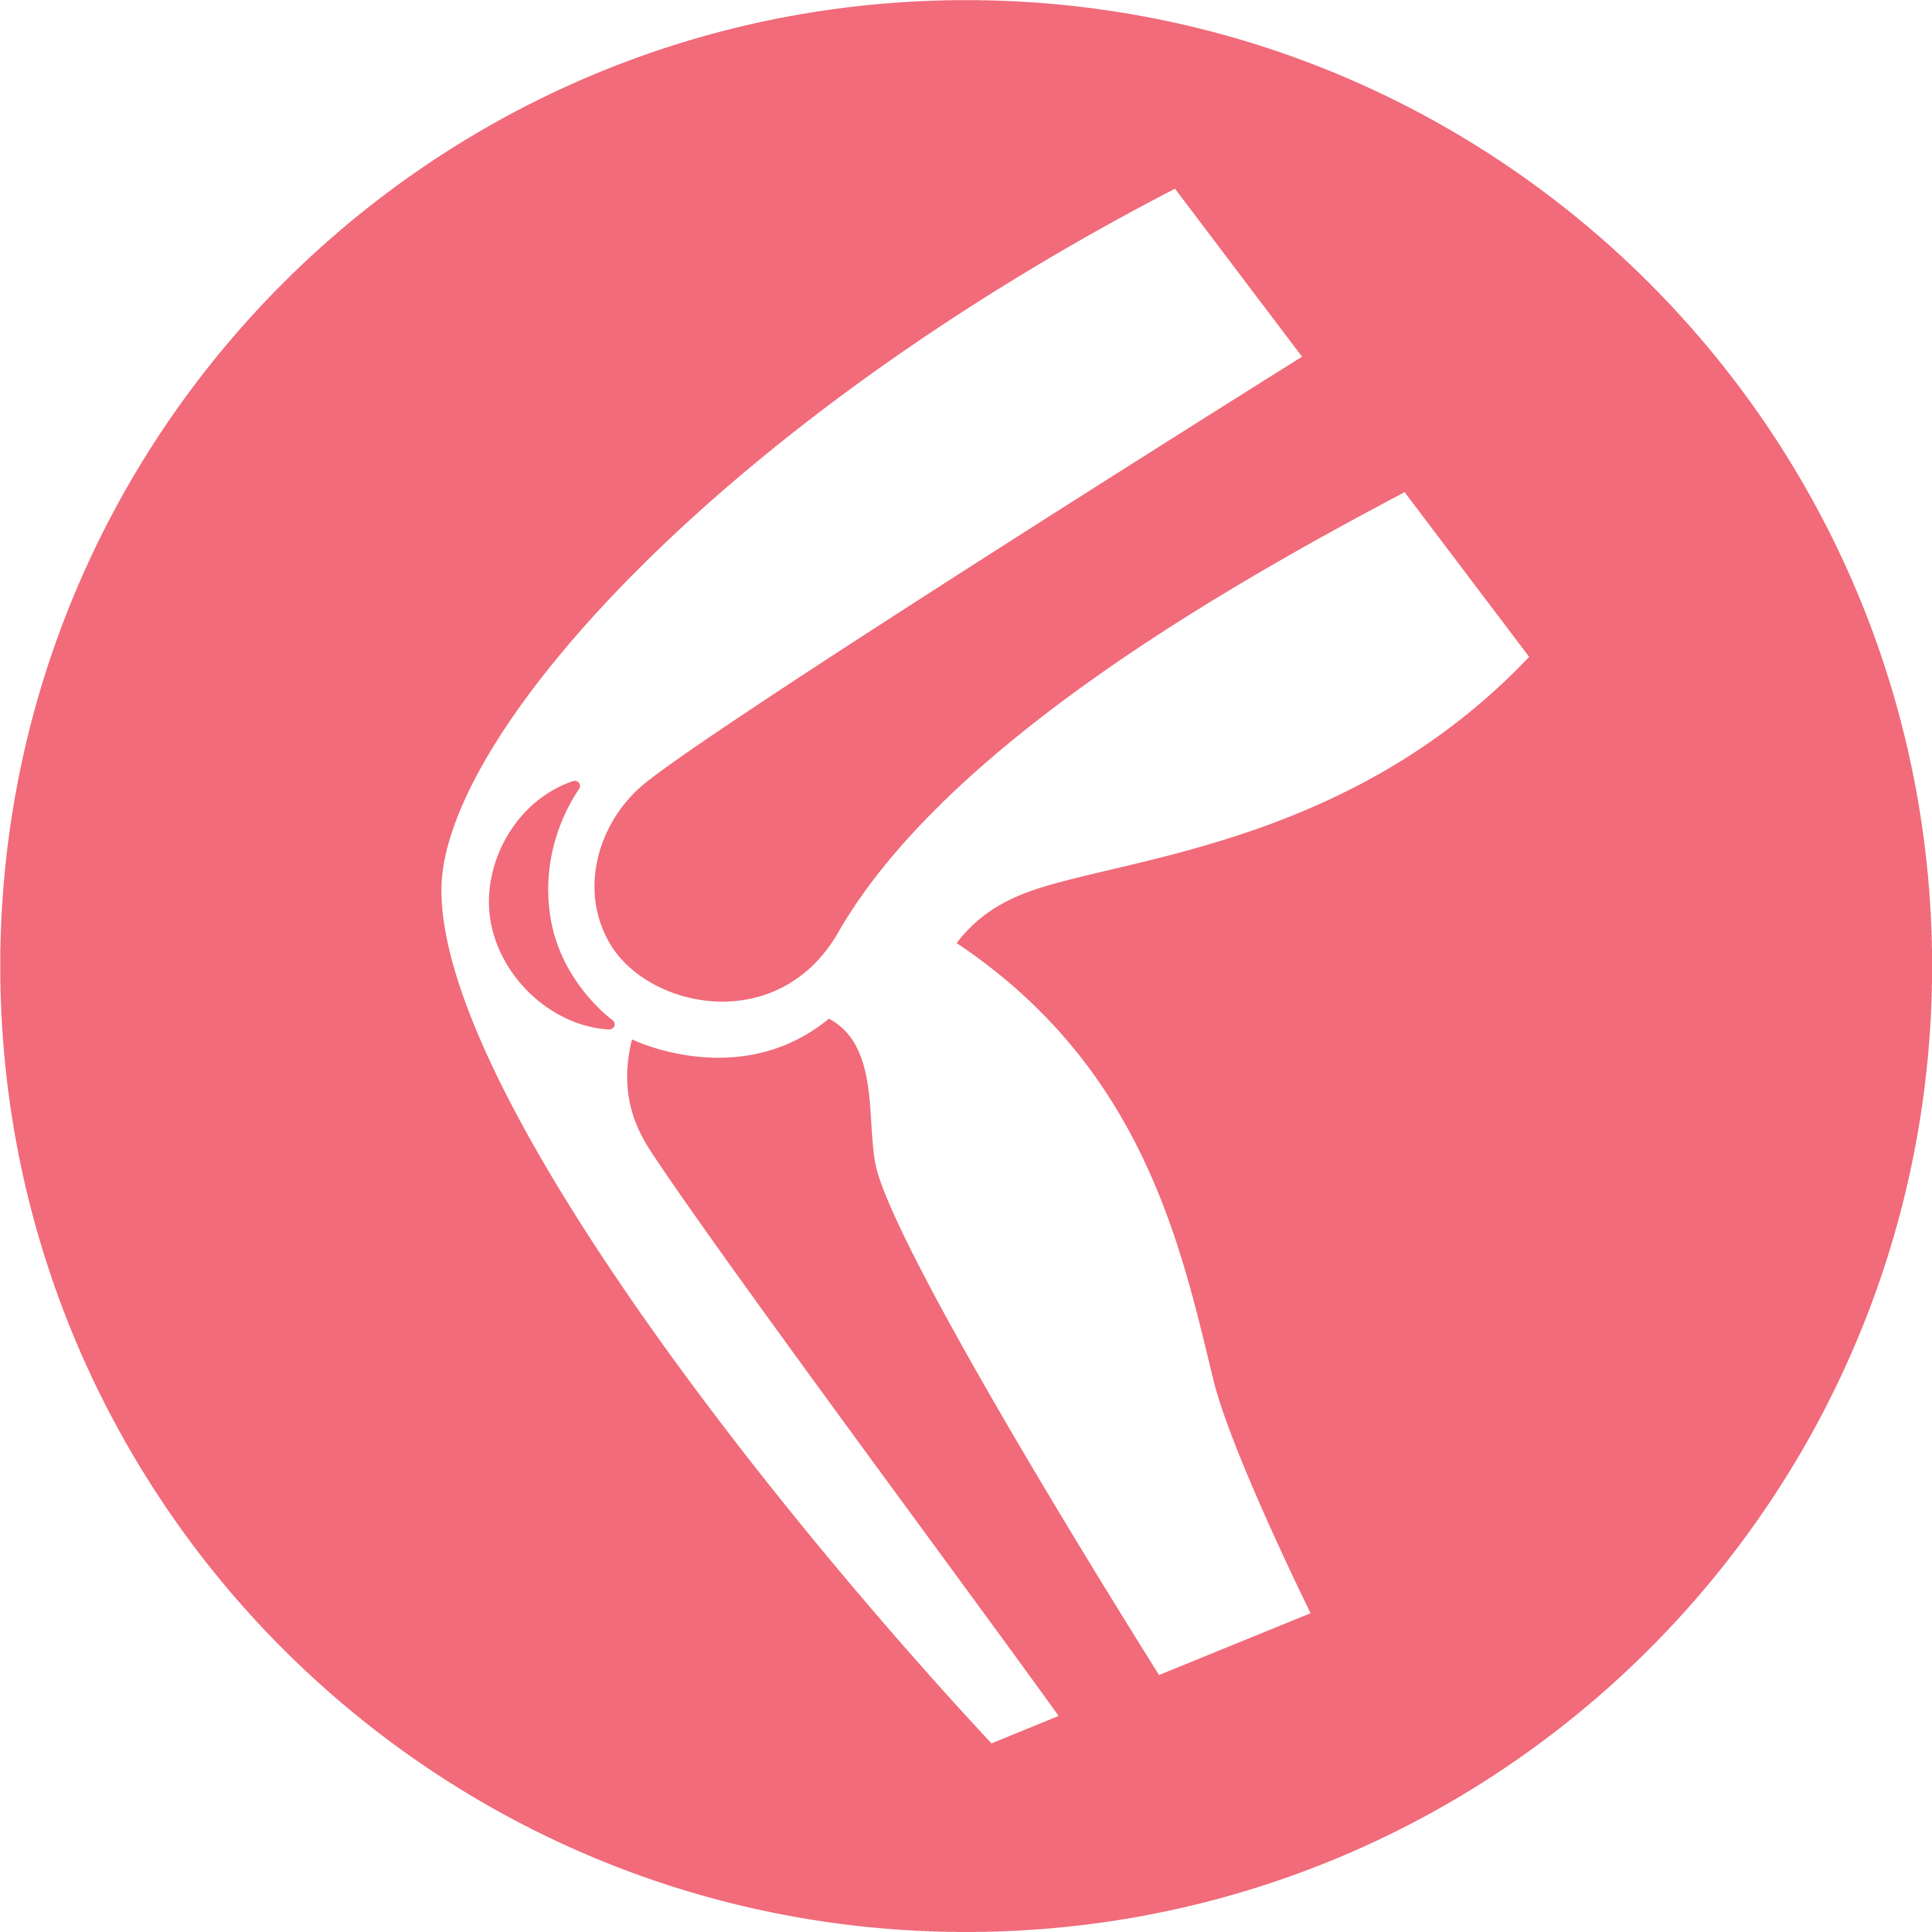 Icon of a knee for Rehab services.